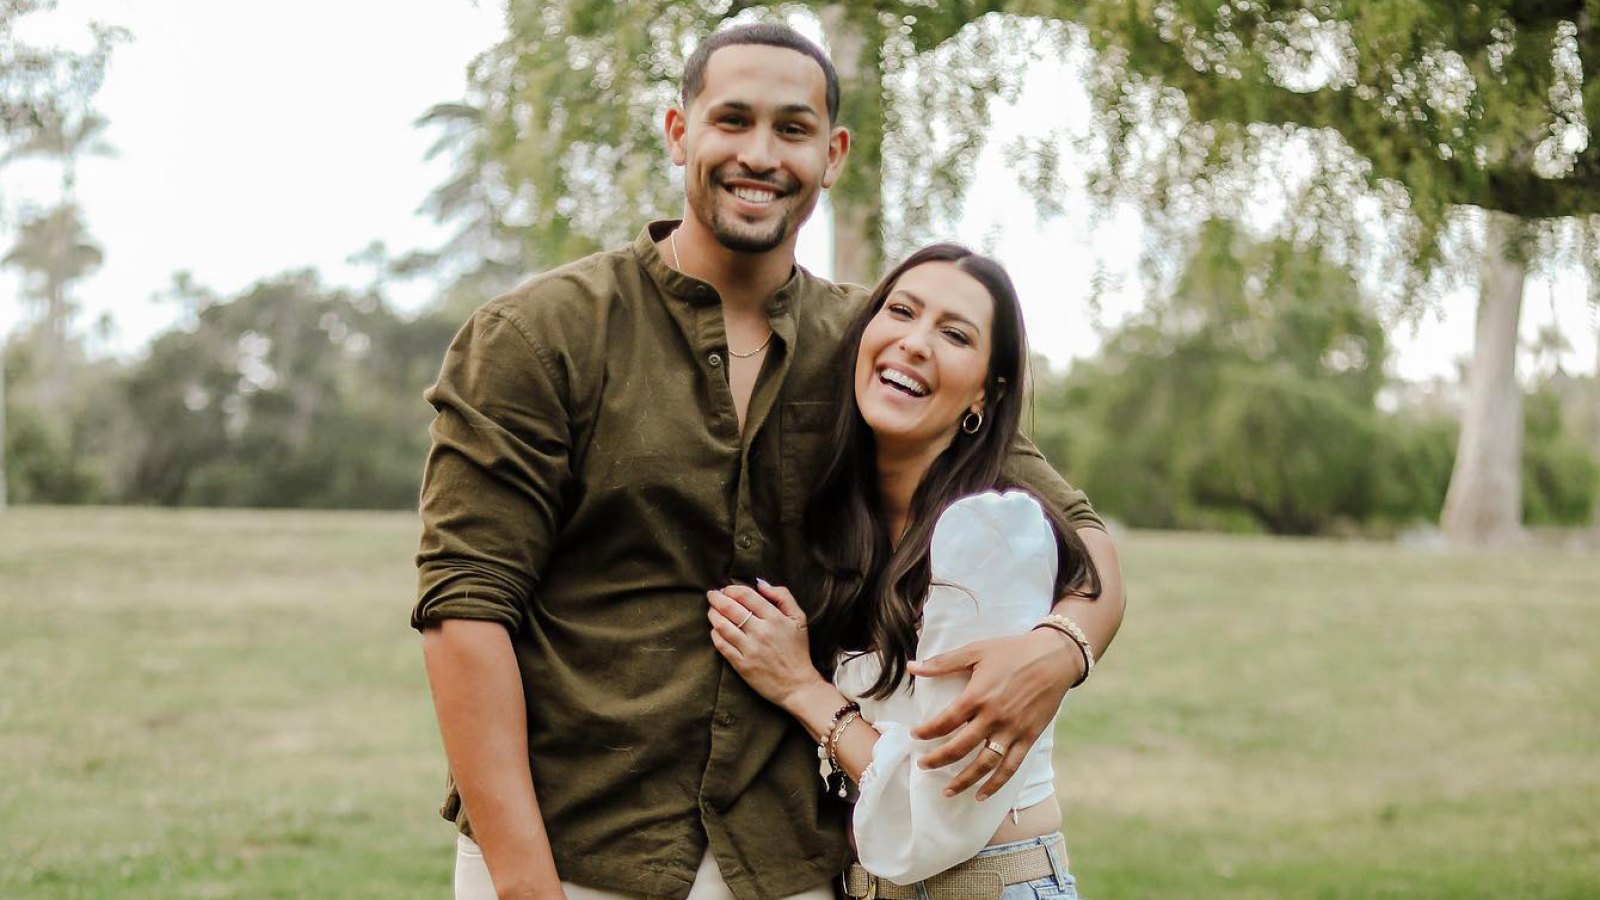 Bachelor Nation's Becca Kufrin and Thomas Jacobs Are Engaged After Less Than 1 Year of Dating